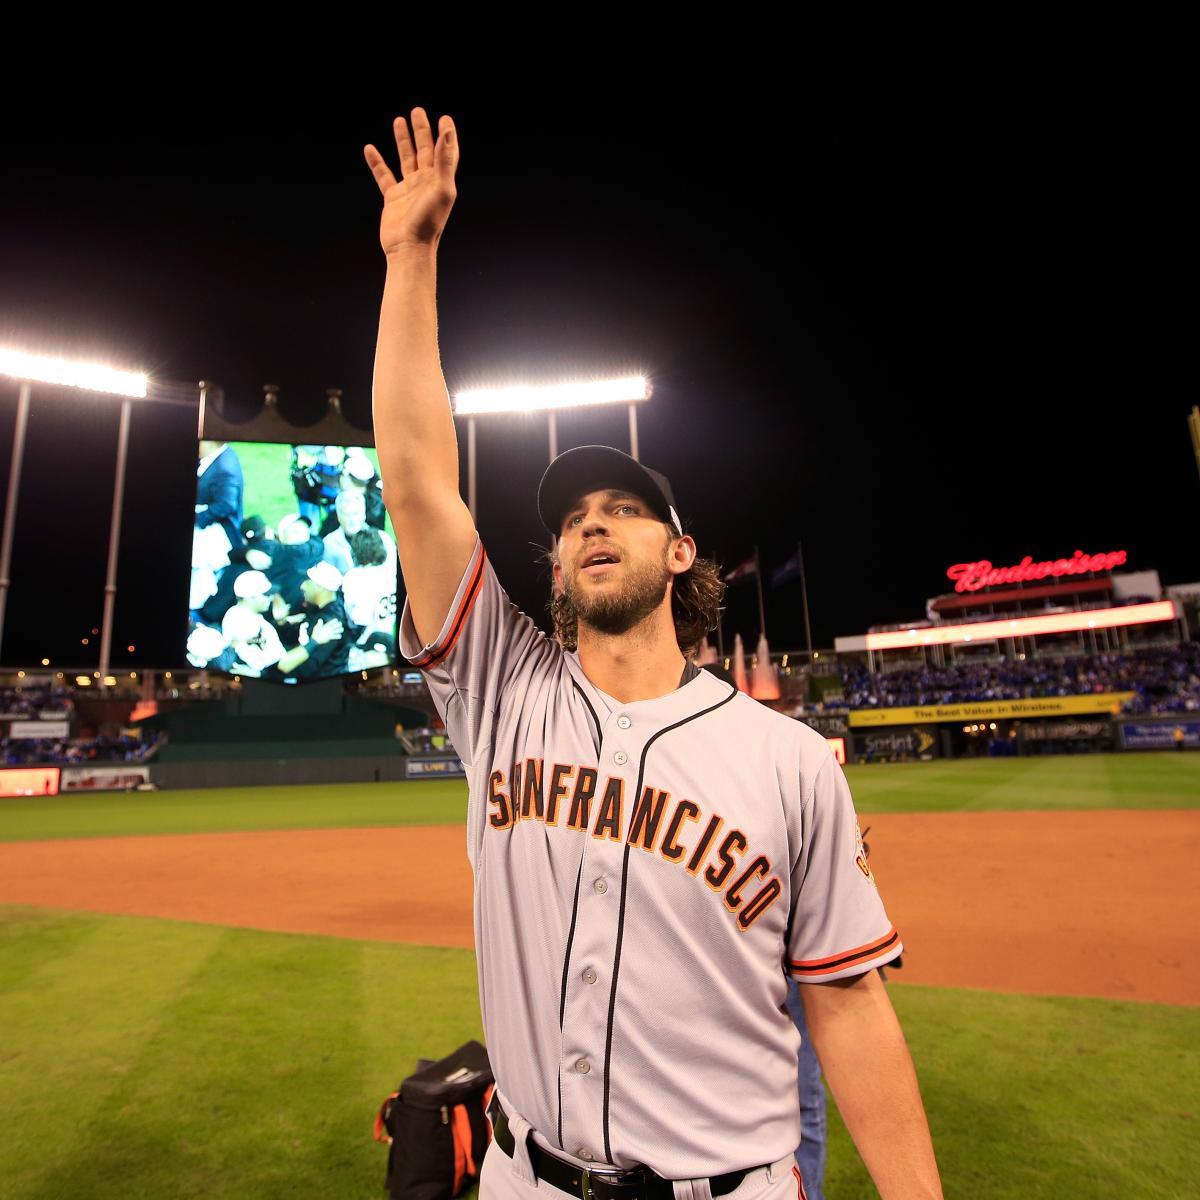 What's next for Madison Bumgarner and the Giants? – Daily Democrat